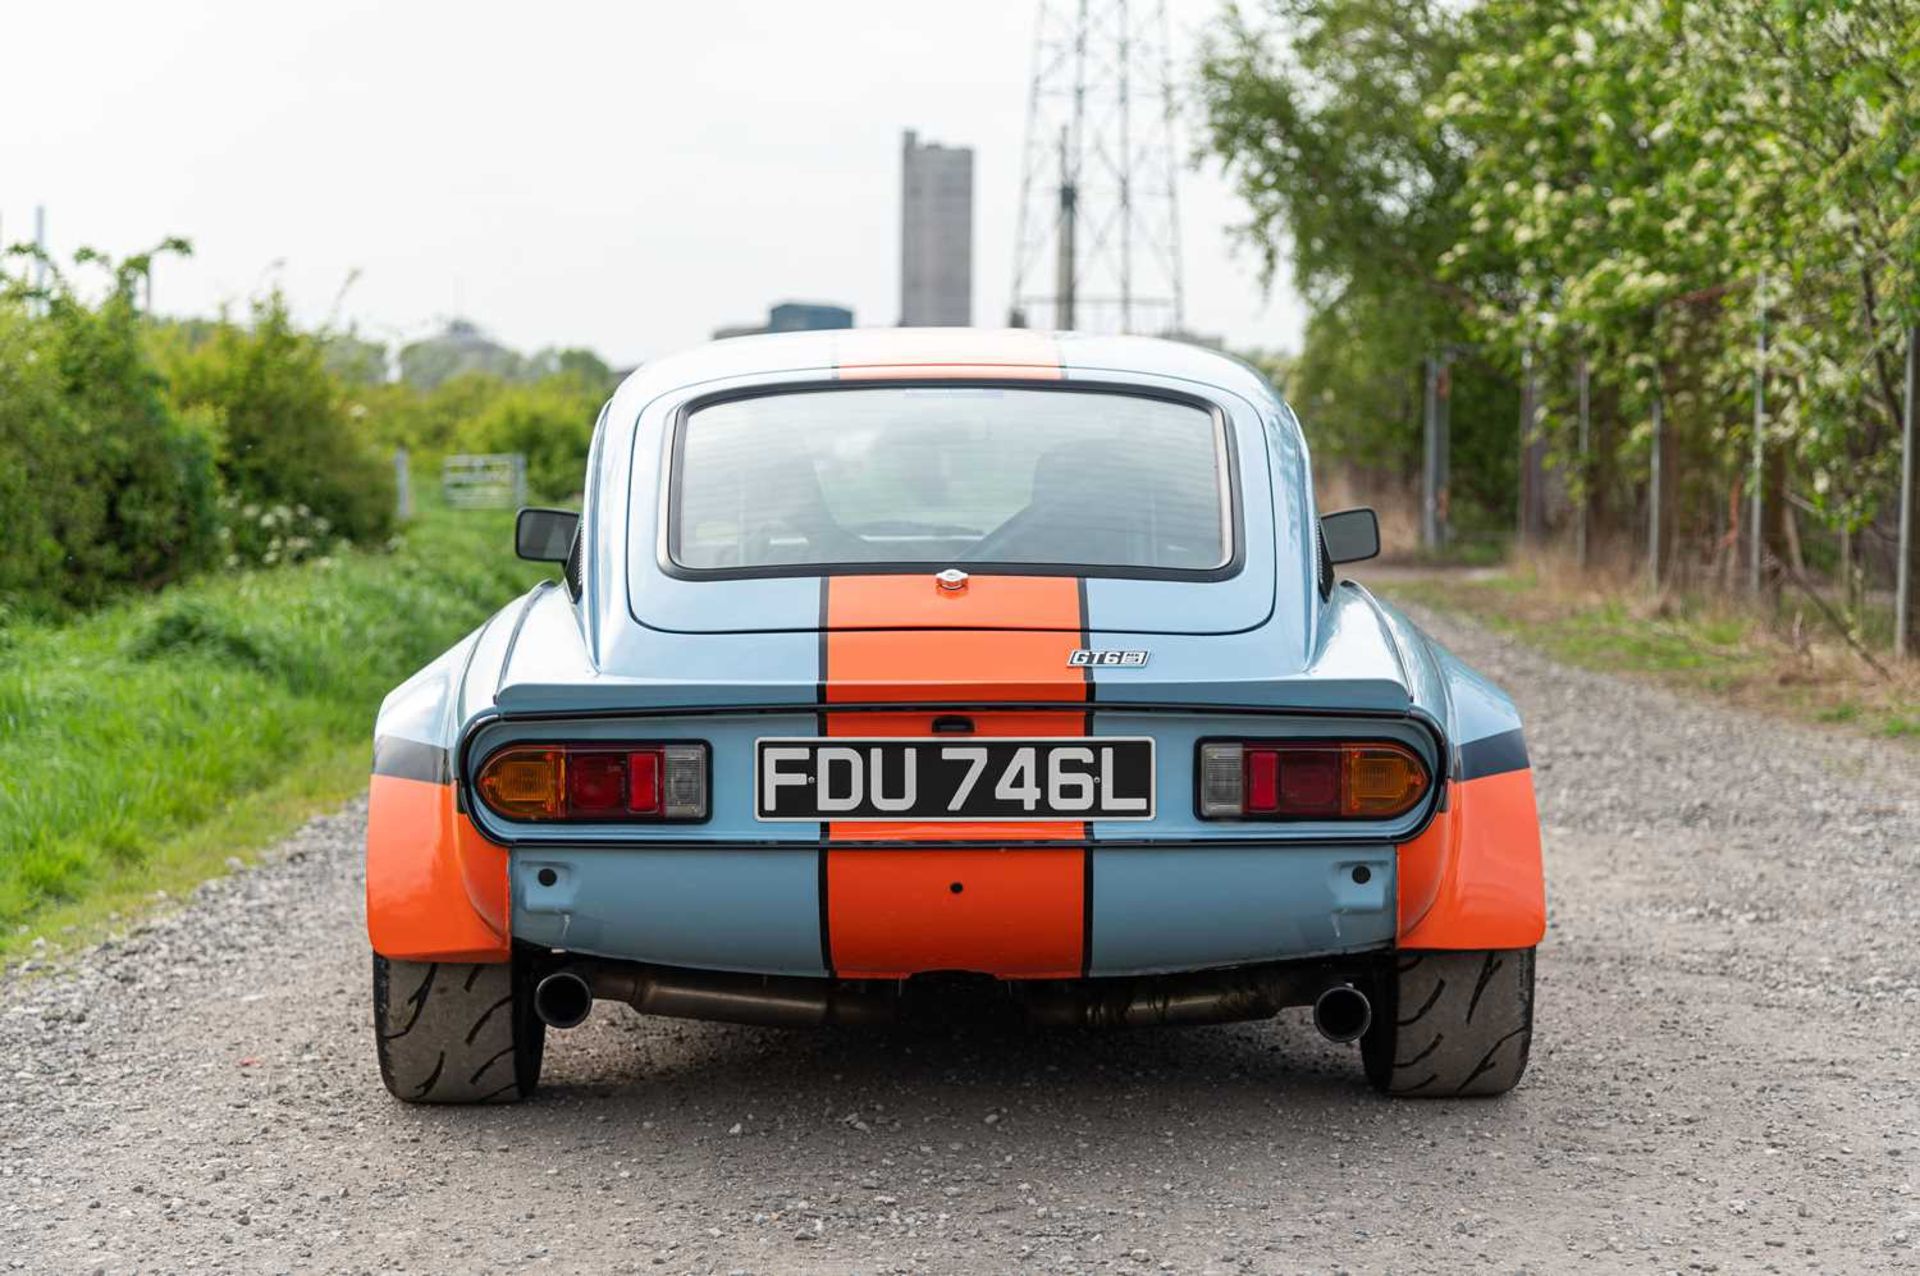 1973 Triumph GT6  ***NO RESERVE*** Presented in Gulf Racing-inspired paintwork, road-going track wea - Image 11 of 65